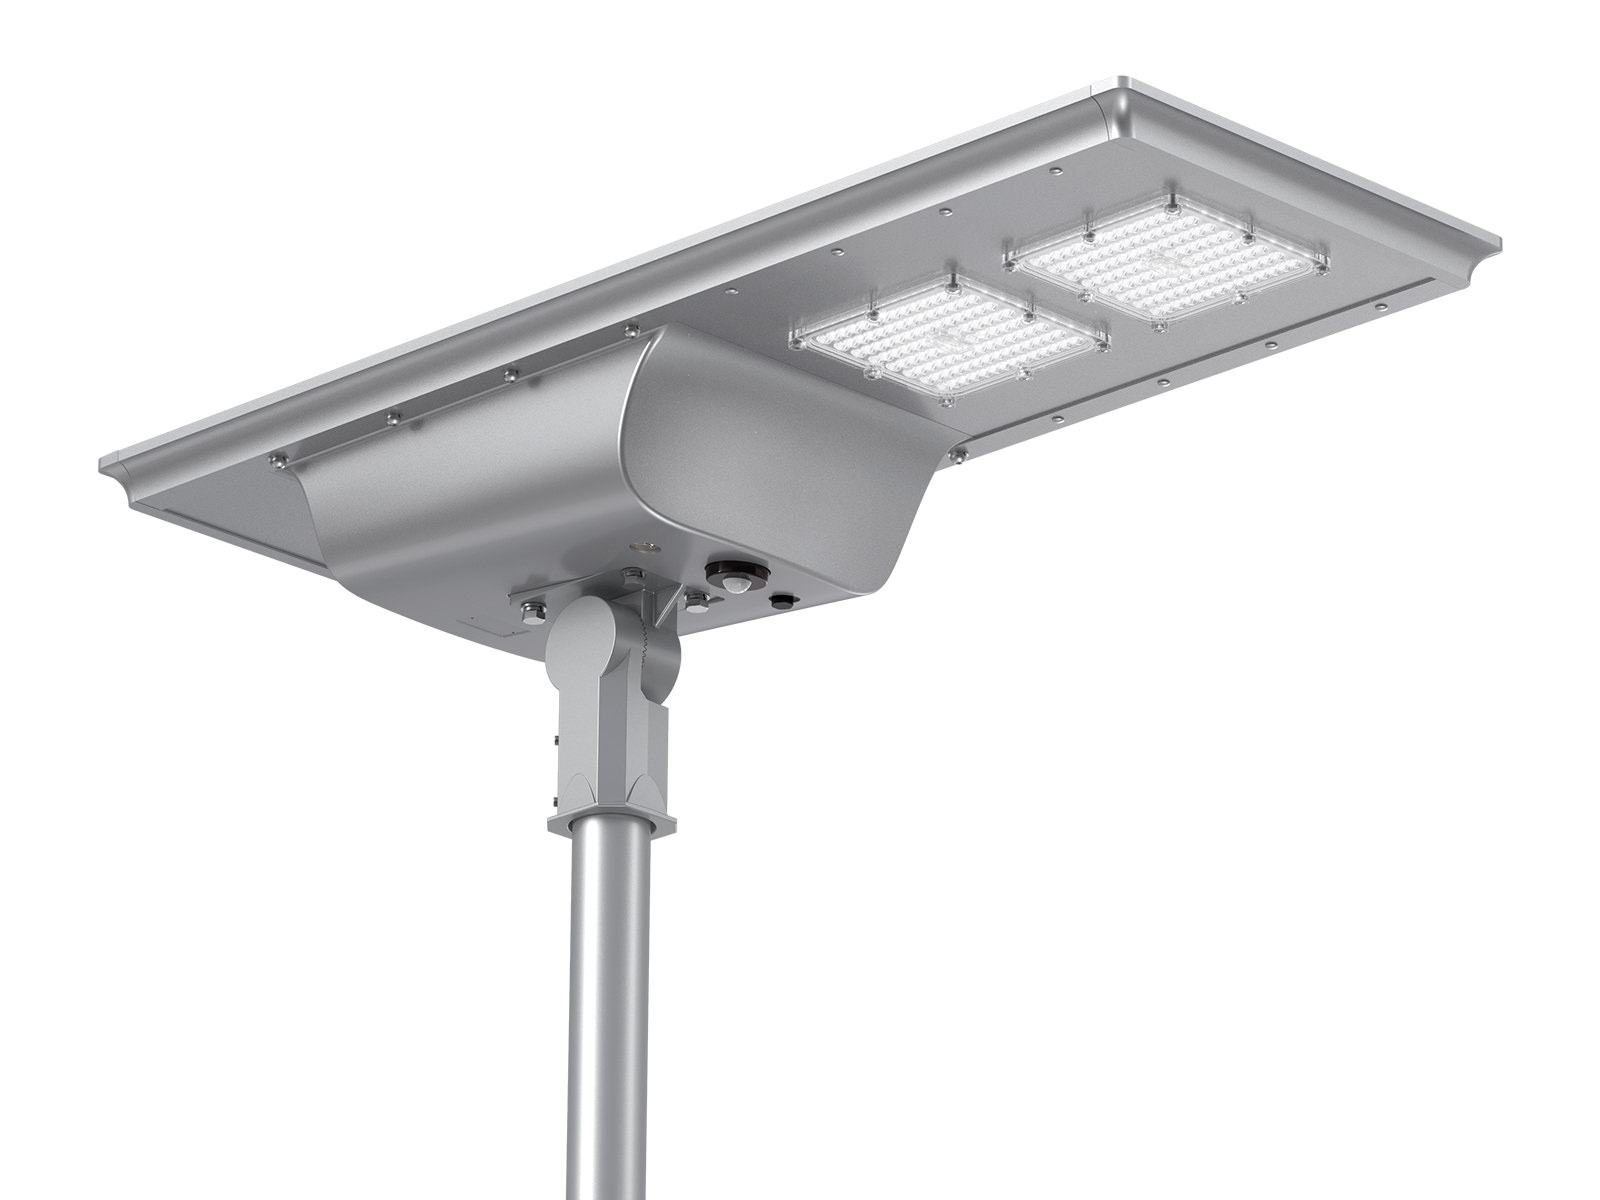 ST50 LED Solar Street Light 200lm/W, Up to 100W, All-in-one Design